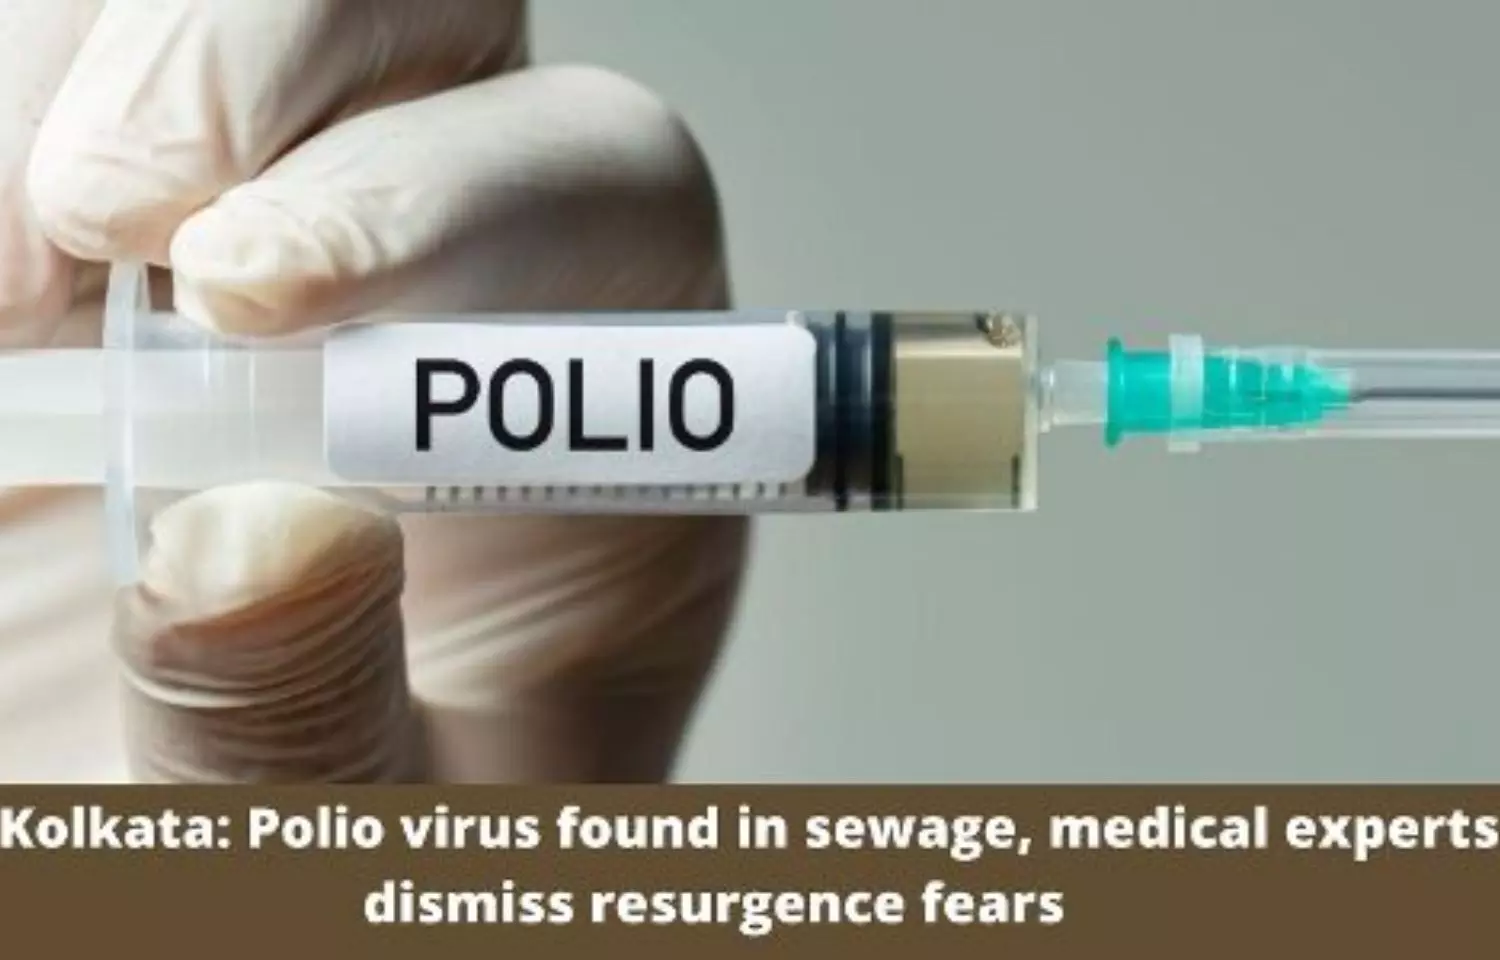 Polio virus found in sewage, medical experts dismiss resurgence fears